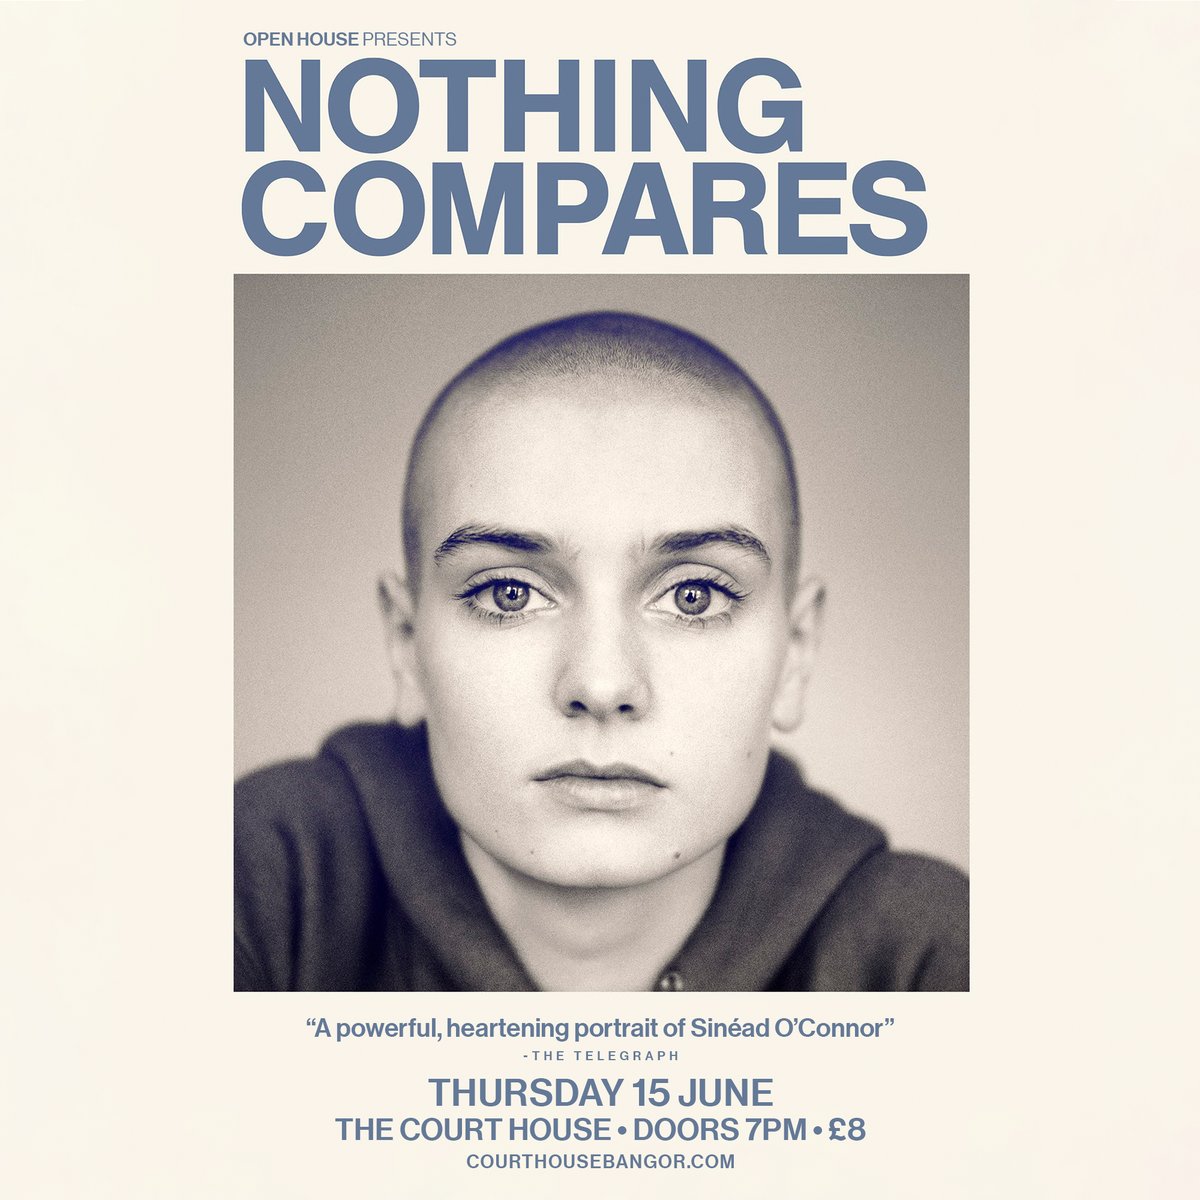 Some of us in the office are big fans of @SineadOConnor, so we're thrilled that Nothing Compares, the powerful documentary on her life, will be coming to The Court House big screen on Thursday 15th June.